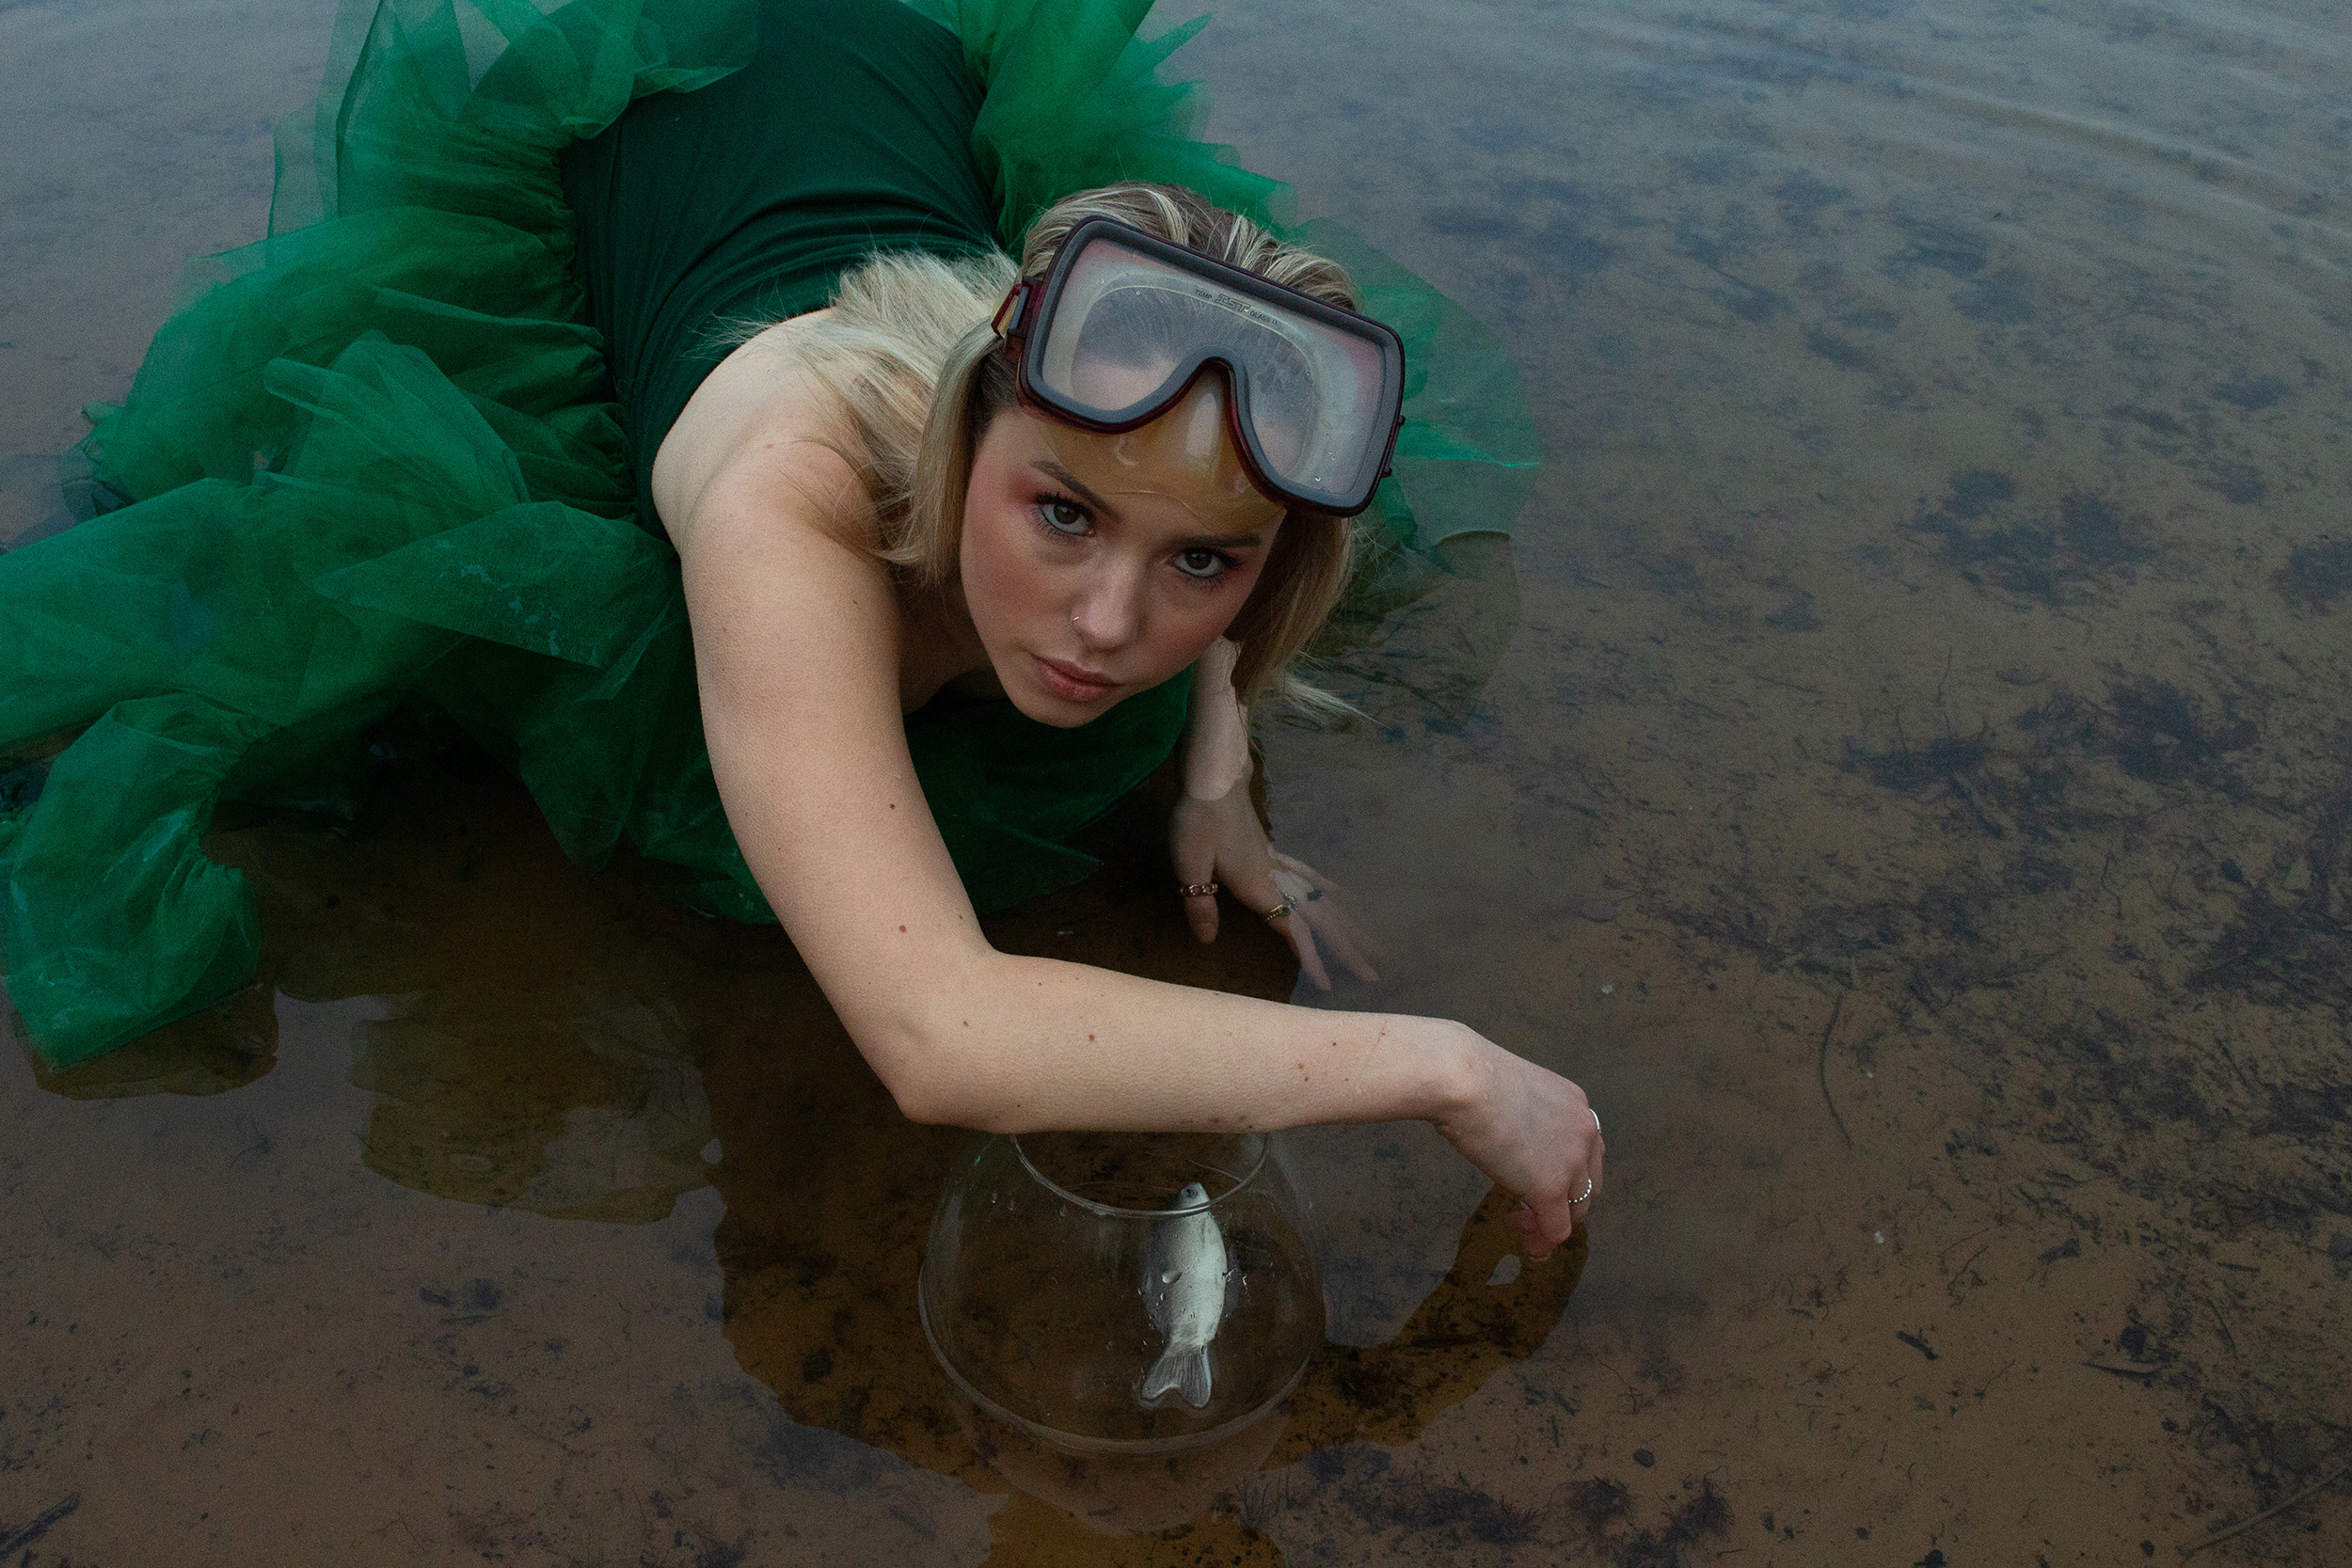 Photograph of model in green dress in shallow water with scuba goggles on and an arm over a fish bowl with a toy fish in it.